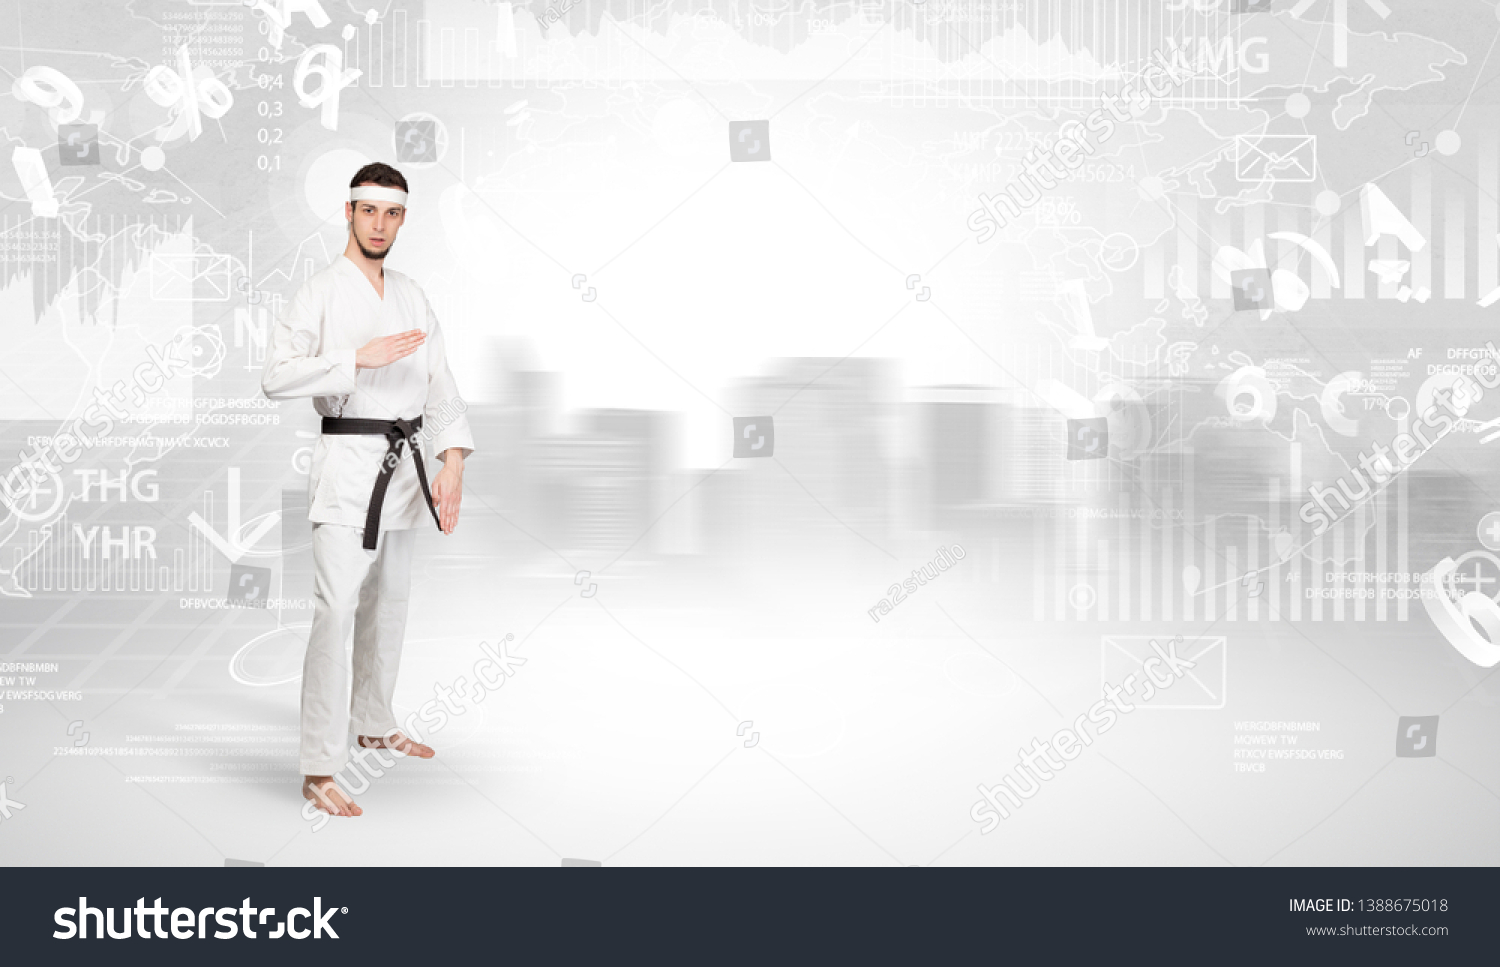 Young karate trainer doing karate tricks on the top of a metropolitan city #1388675018